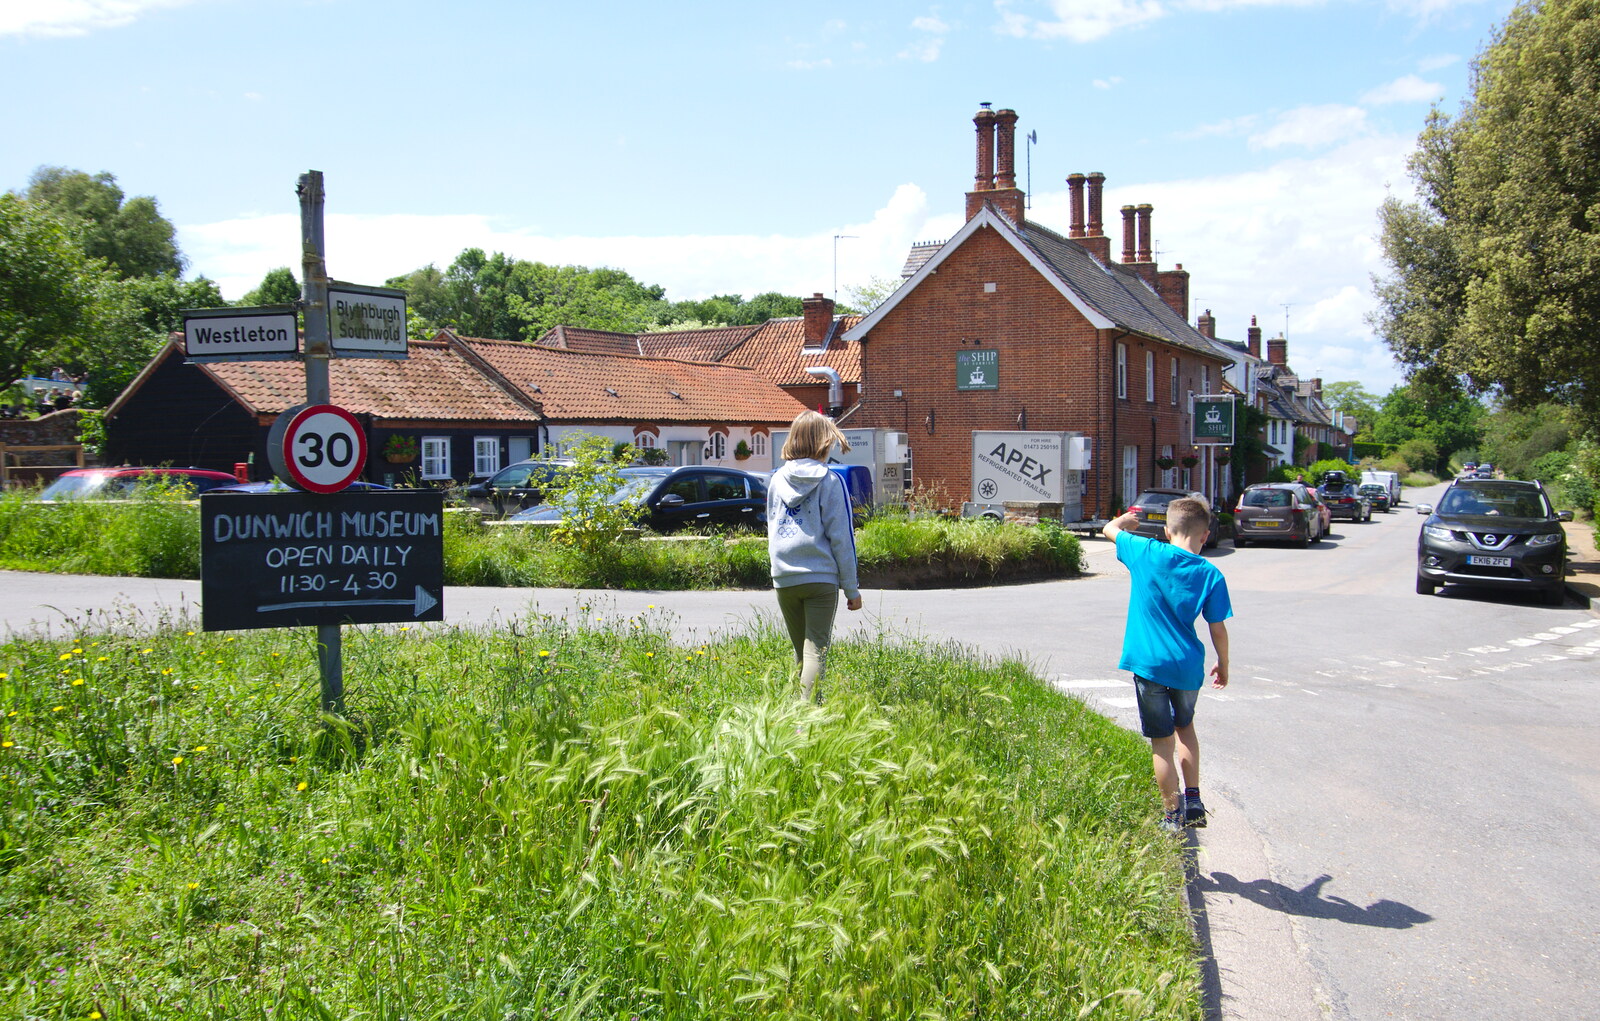 We arrive at the Ship Inn at Dunwich from Cliff House Camping, Dunwich, Suffolk - 15th June 2019